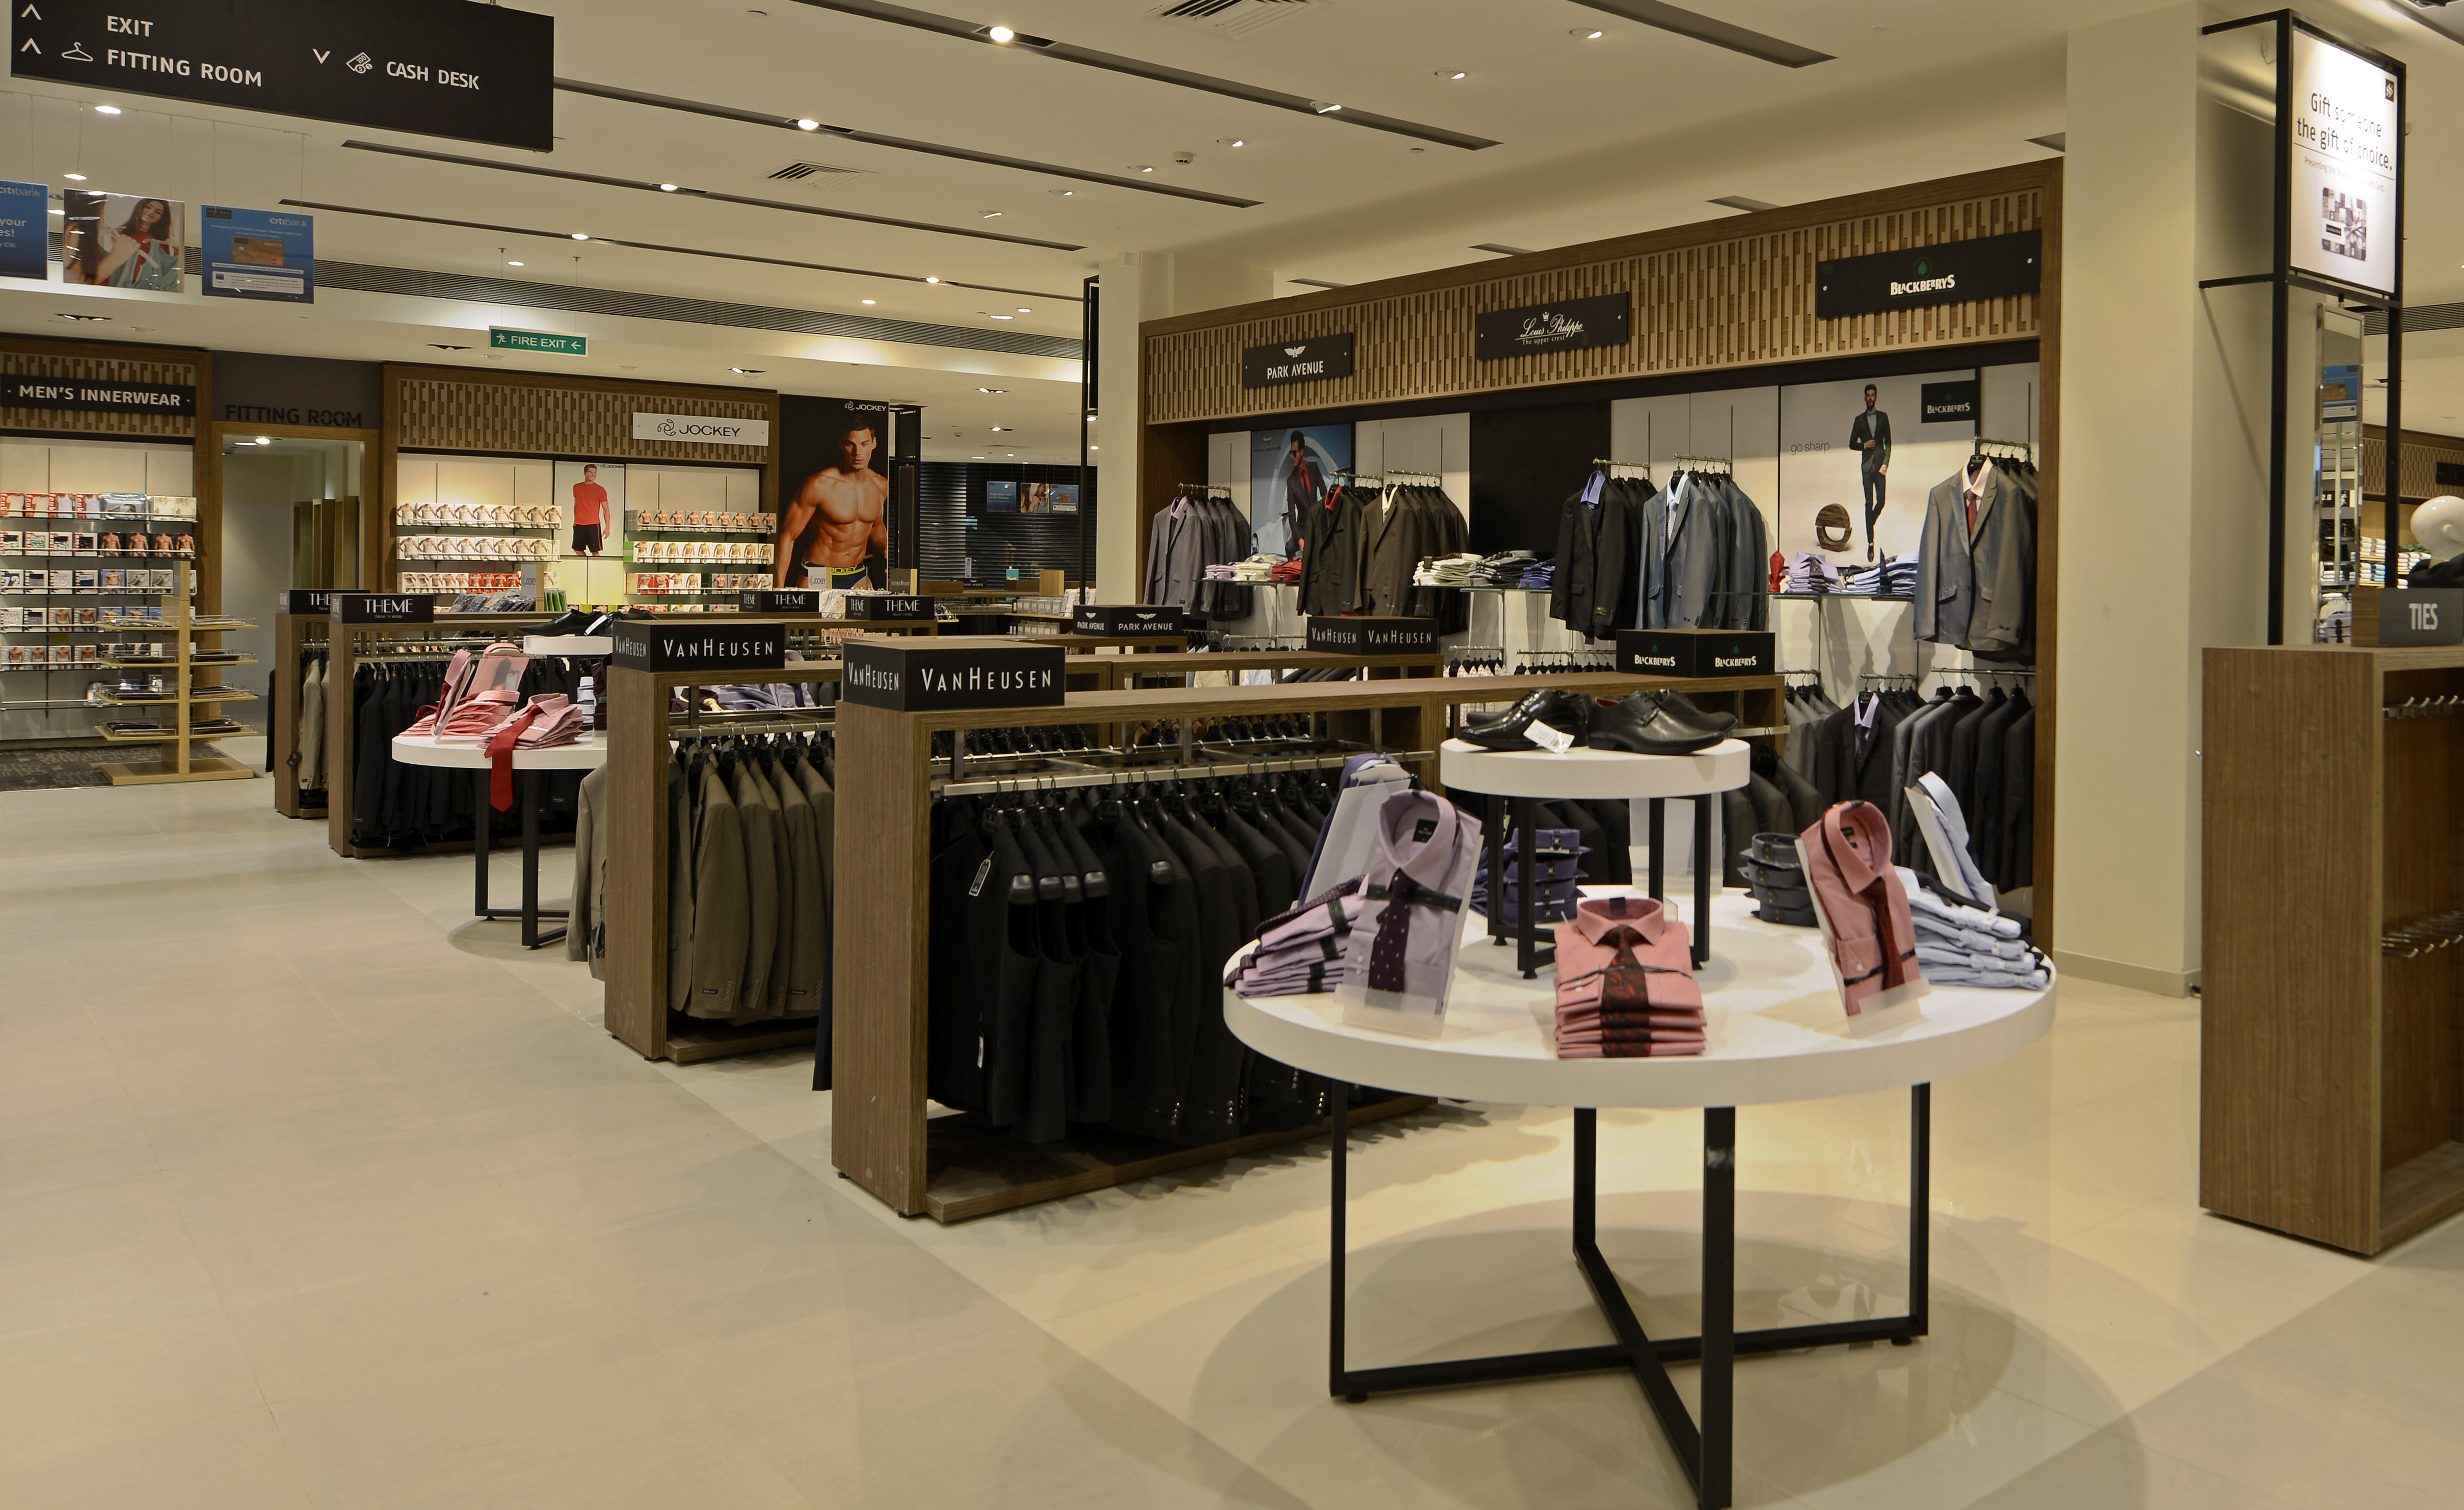 Indian retail chain Shoppers Stop readies plans to lure more